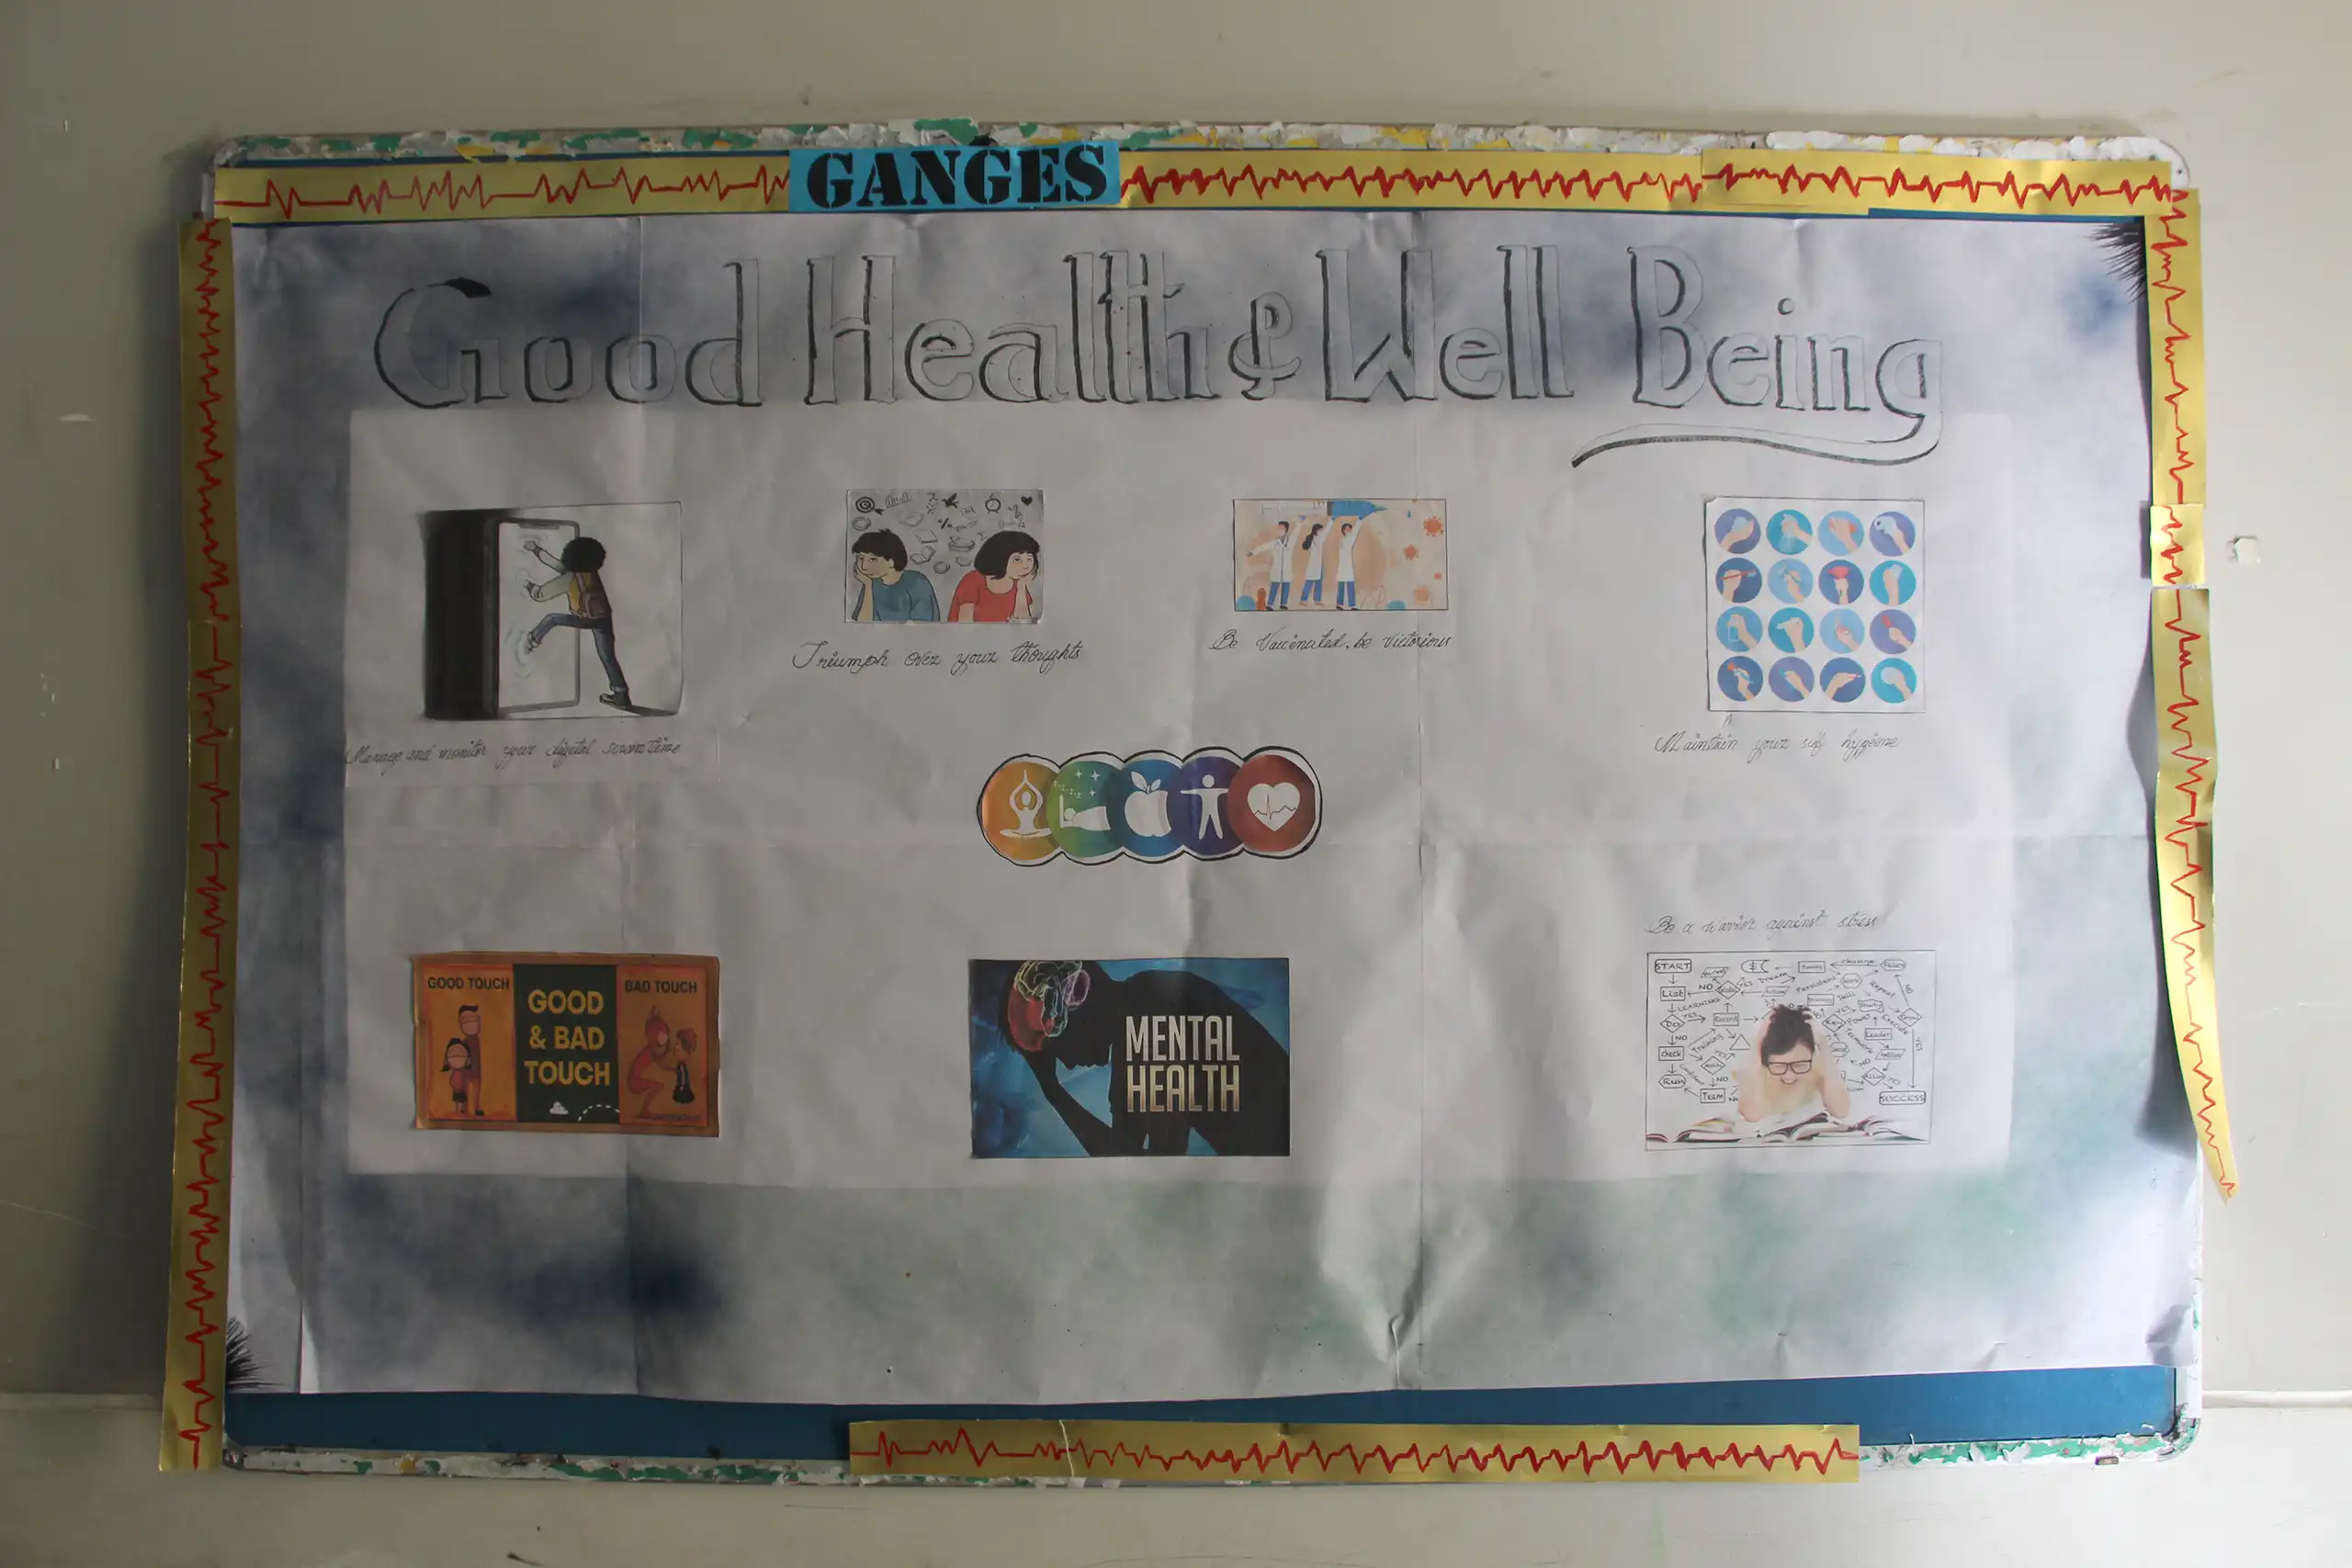 House Ganges decorated bulletin board with good health and well being chart during House-Wise Bulletin Board Competition at DPS Warangal.